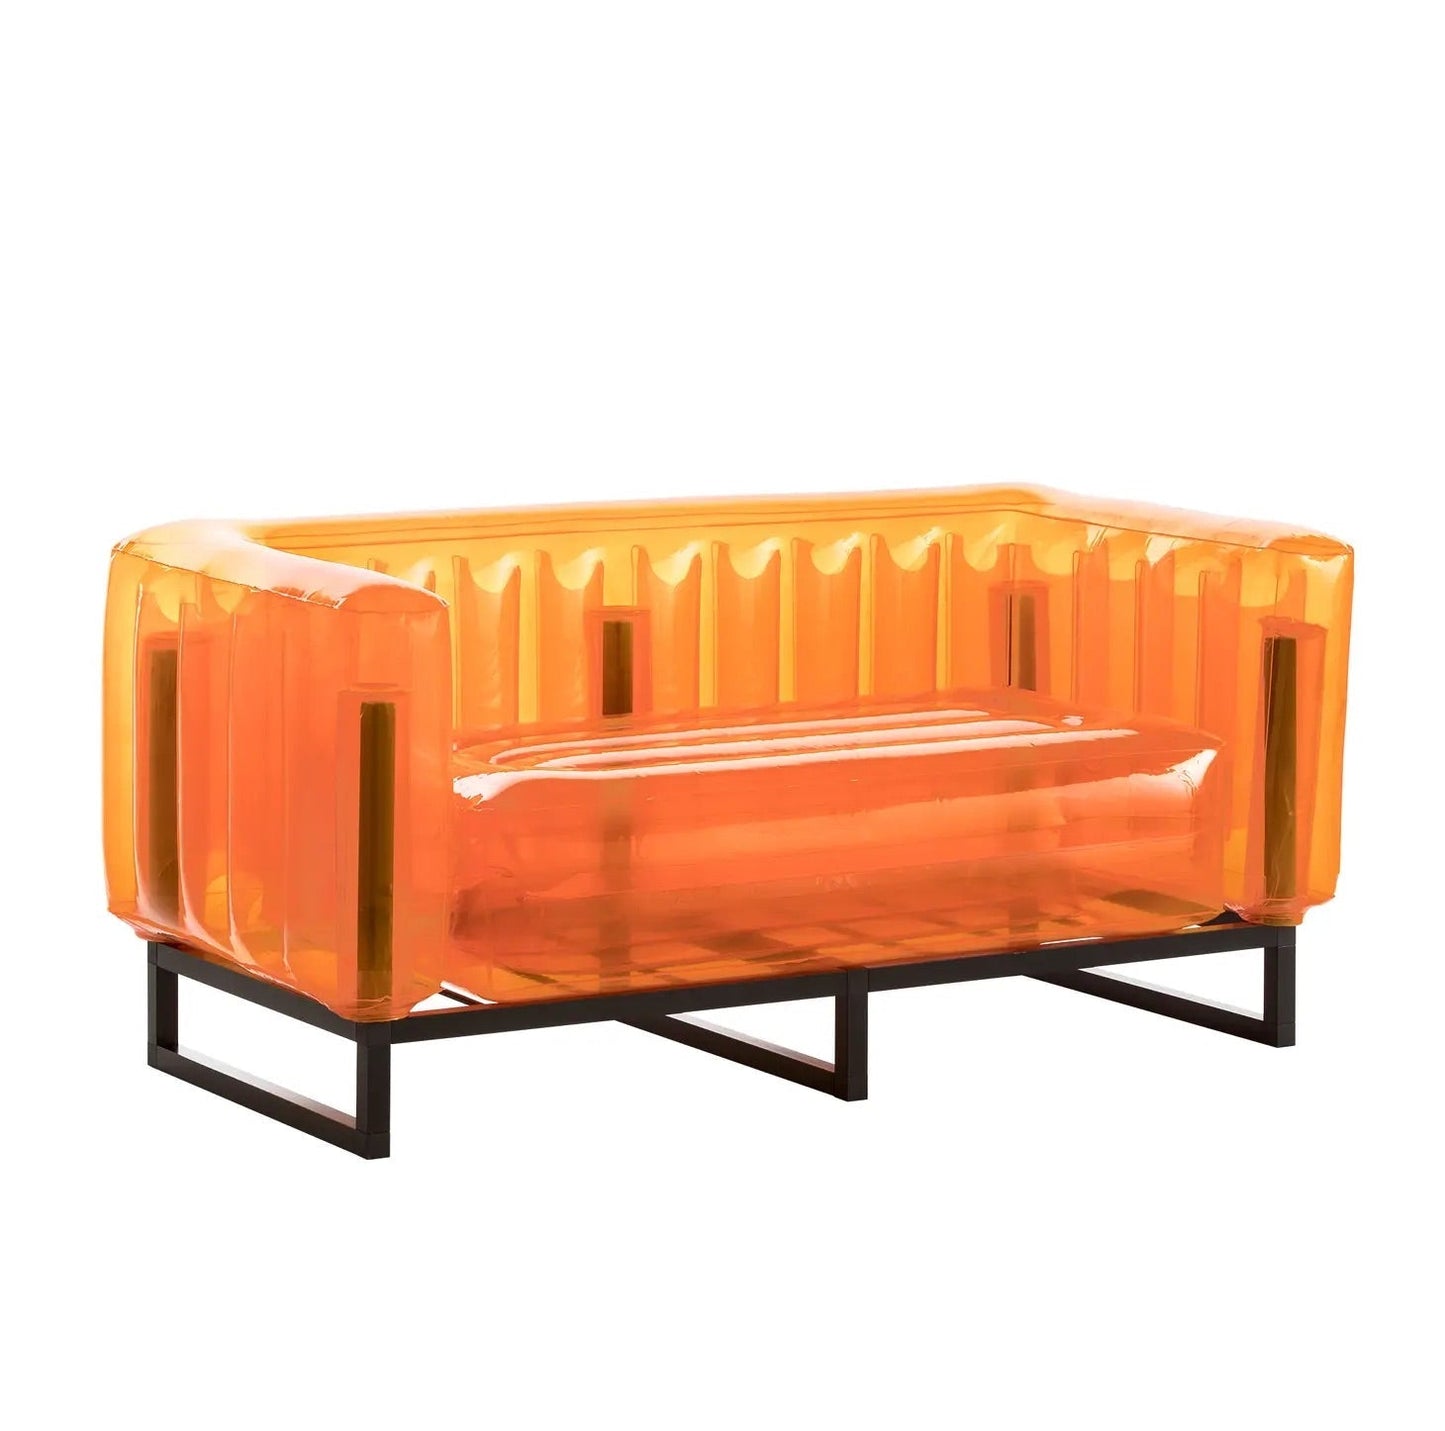 Mojow Outdoor Collections - Indoor/Outdoor Inflatable Sets